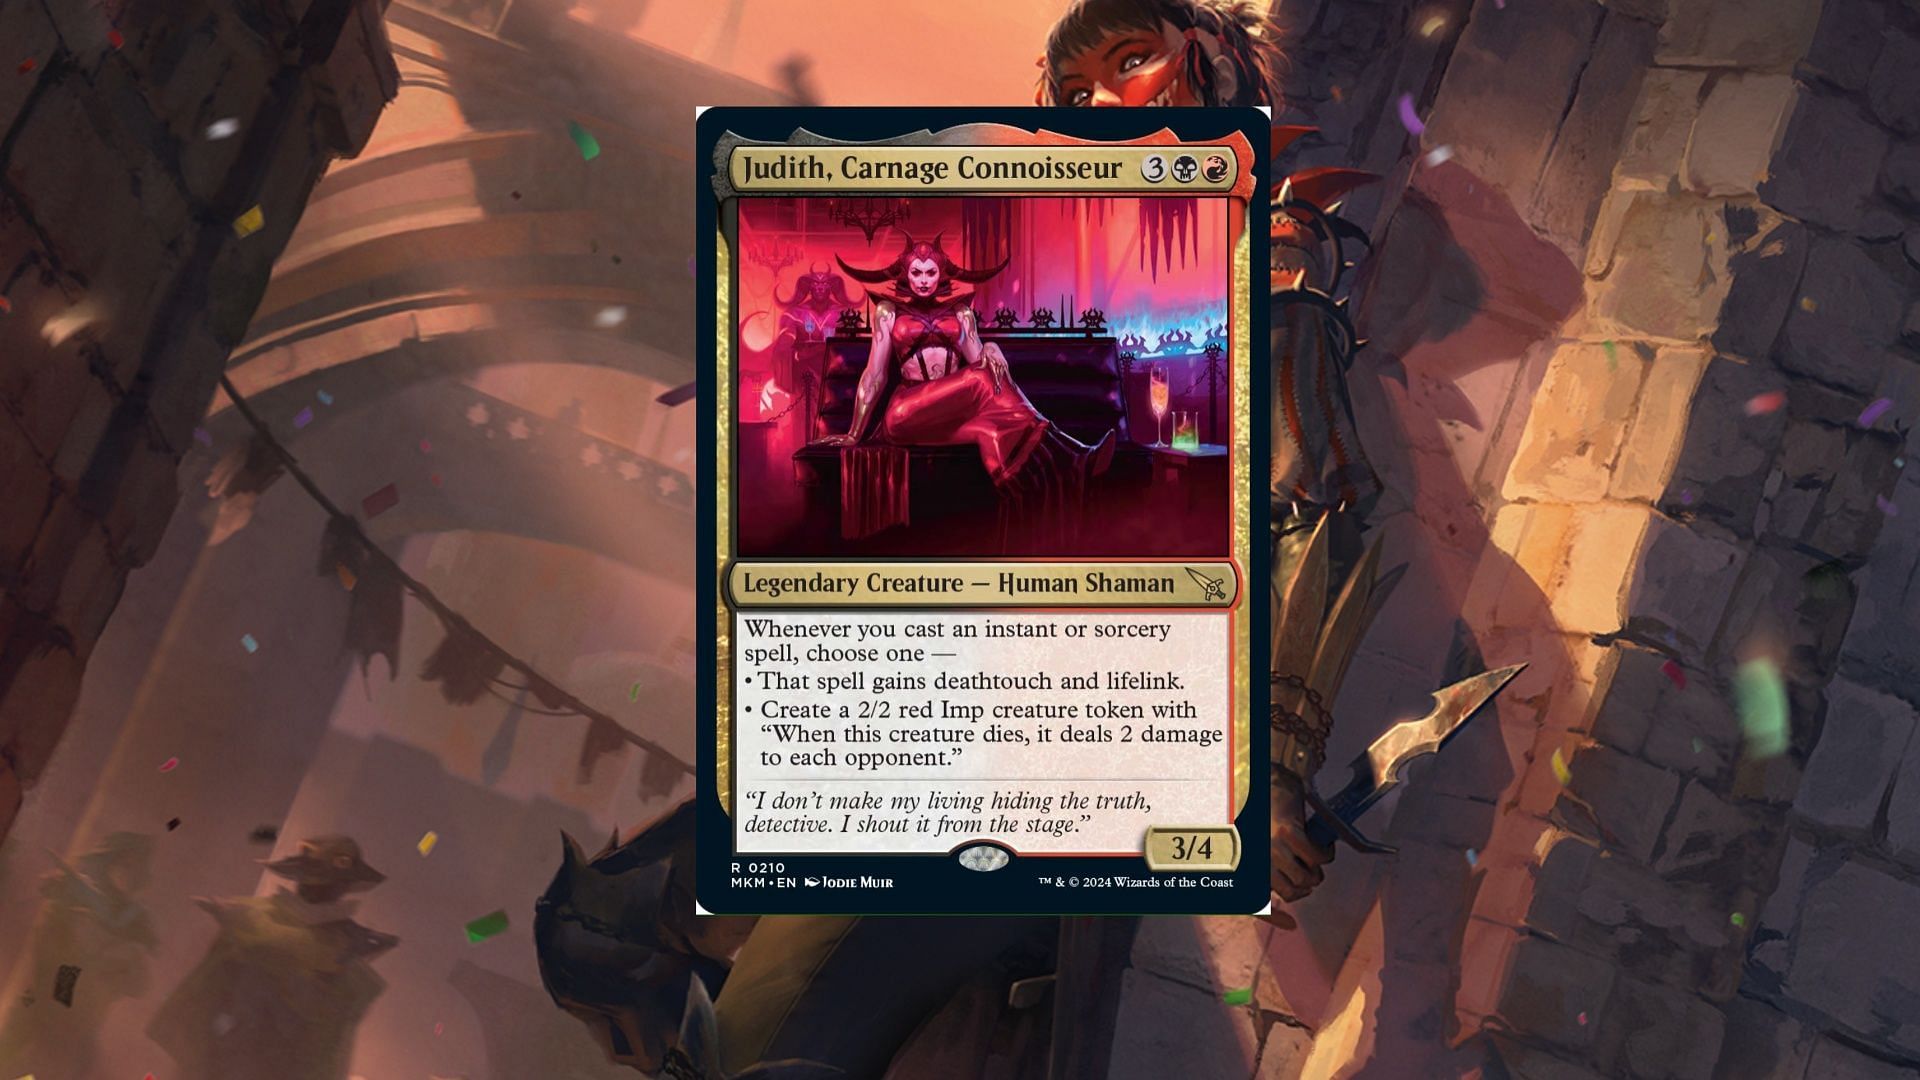 Judith, Carnage Connoisseur in MTG (Image via Wizards of the Coast)